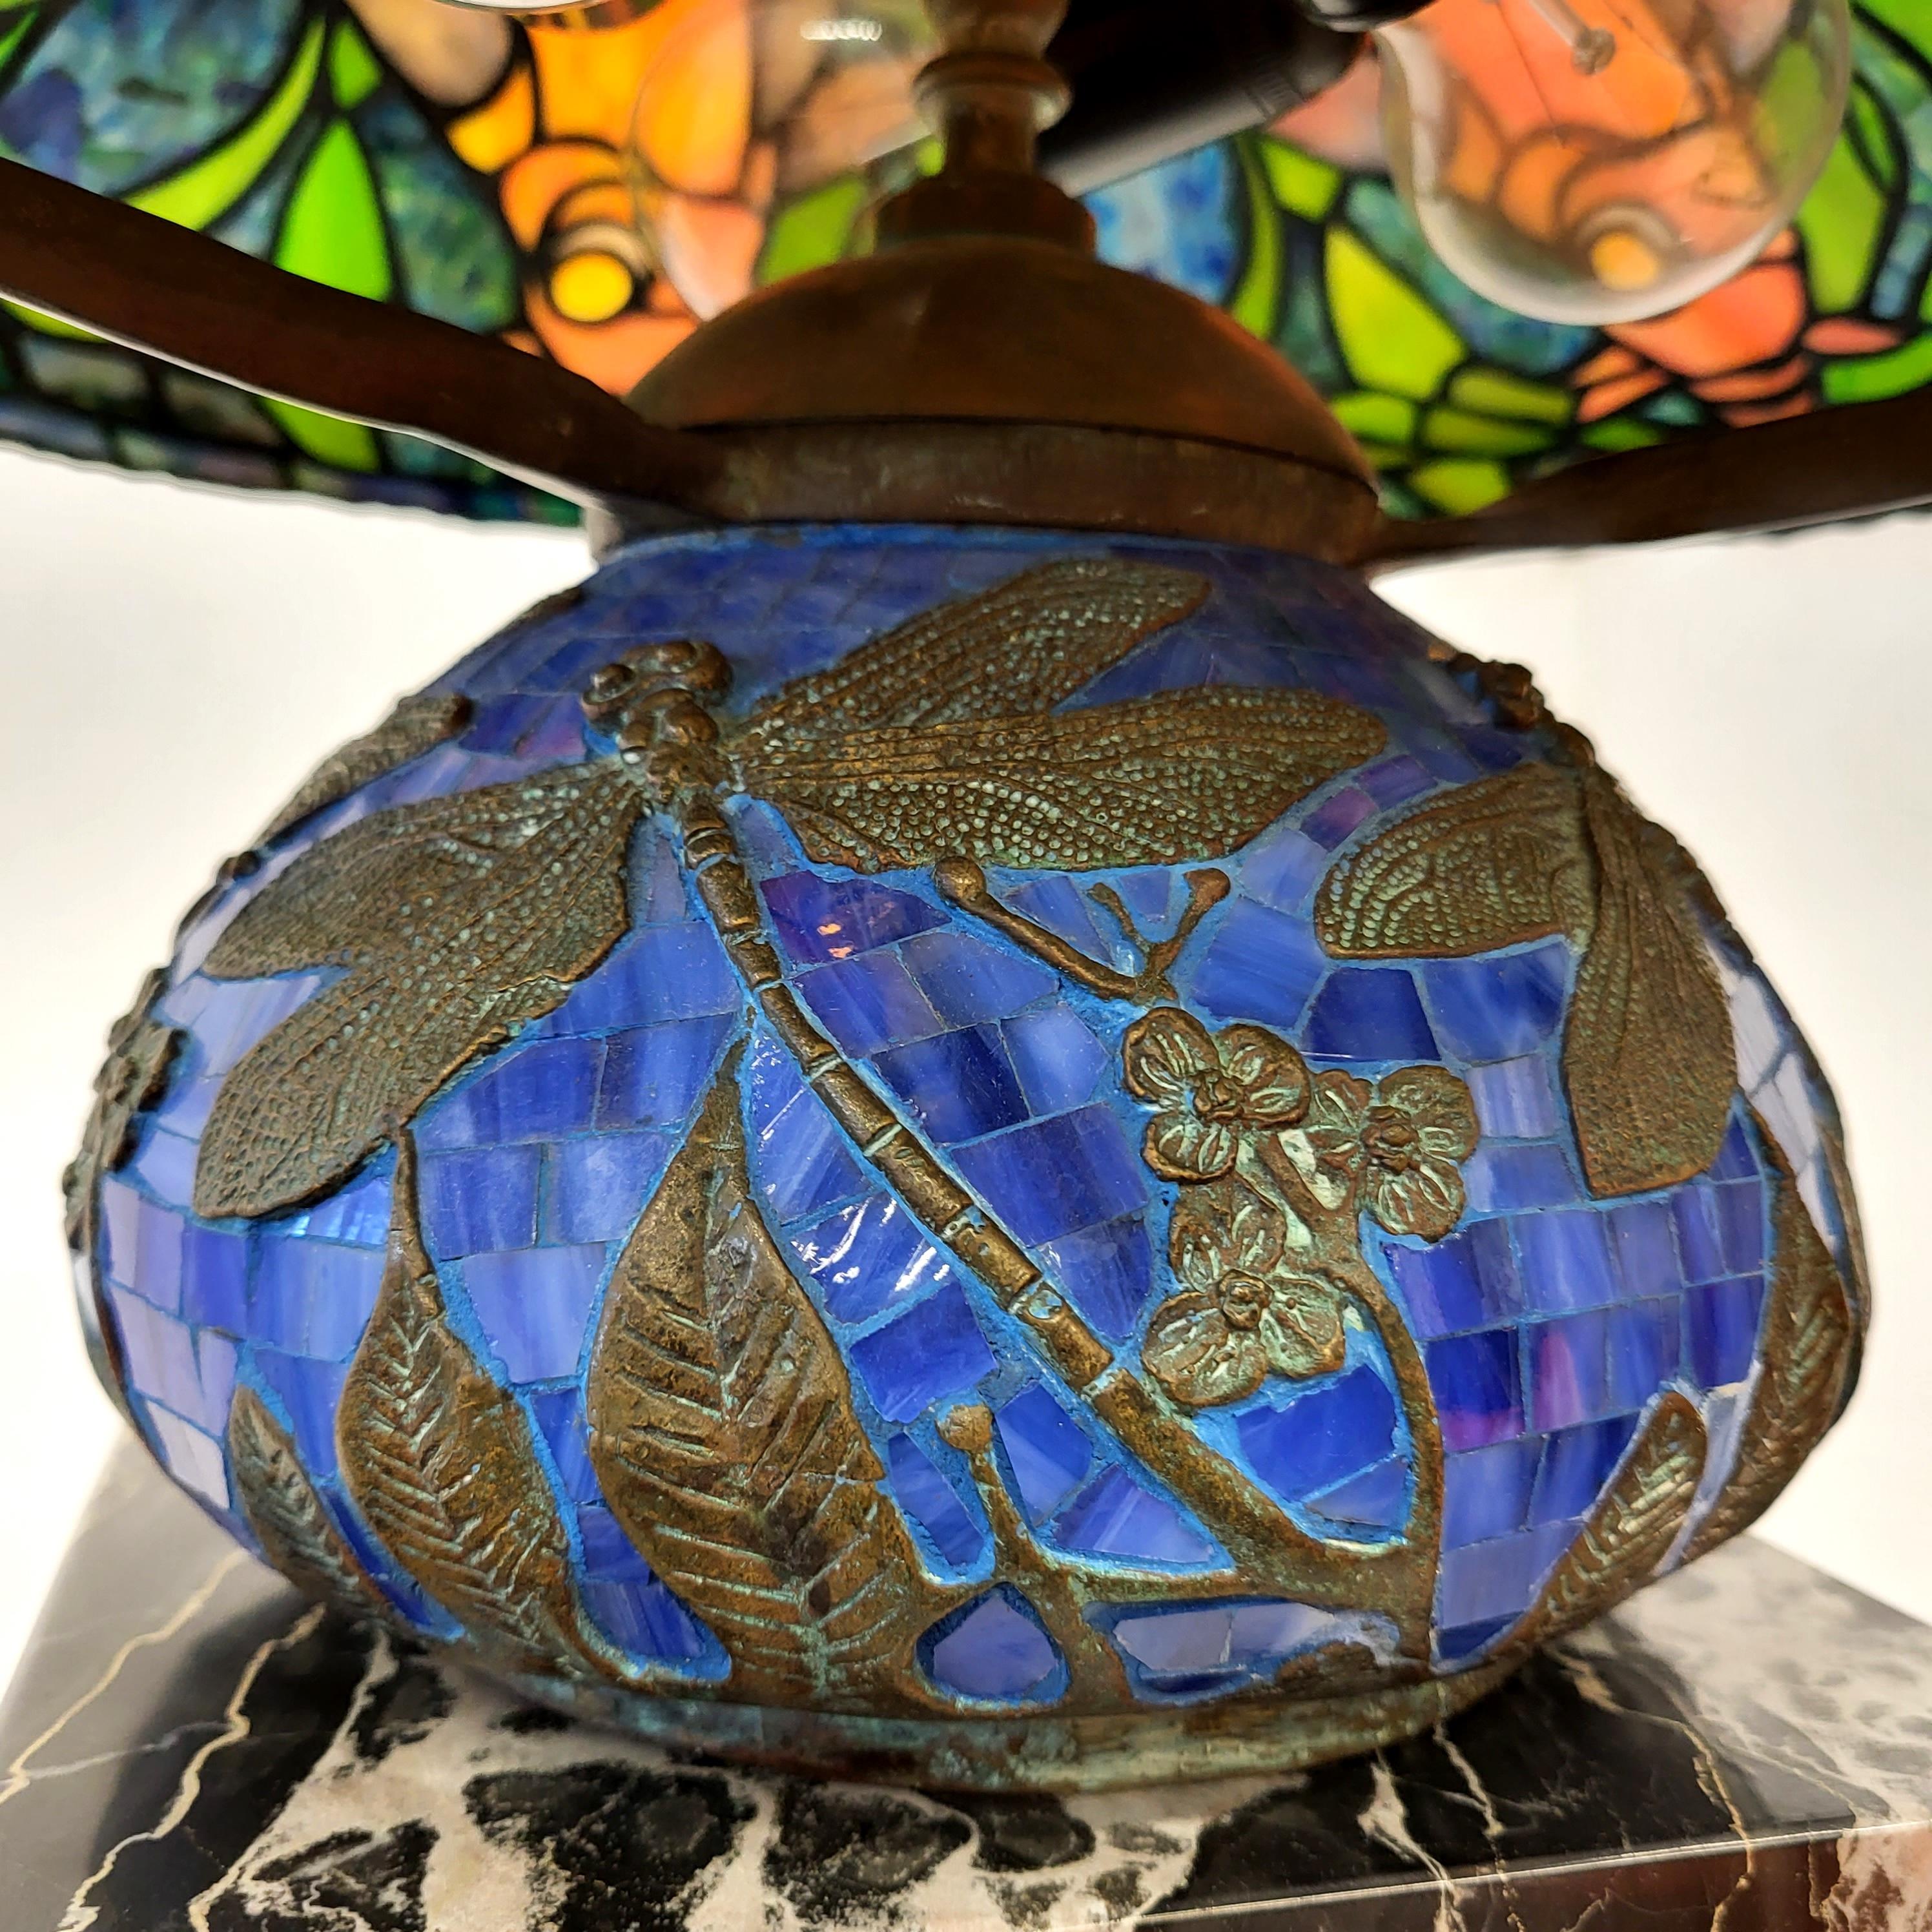 Stunning and amazing table lamp in the manner of Tiffany Studios. 
Very impressive handmade lamp with a wonderful blue libelle base.
 
Very fine handwork, colourful glass. In the manner of the Dragonfly lamp.

The lamp has an amazing warm light and